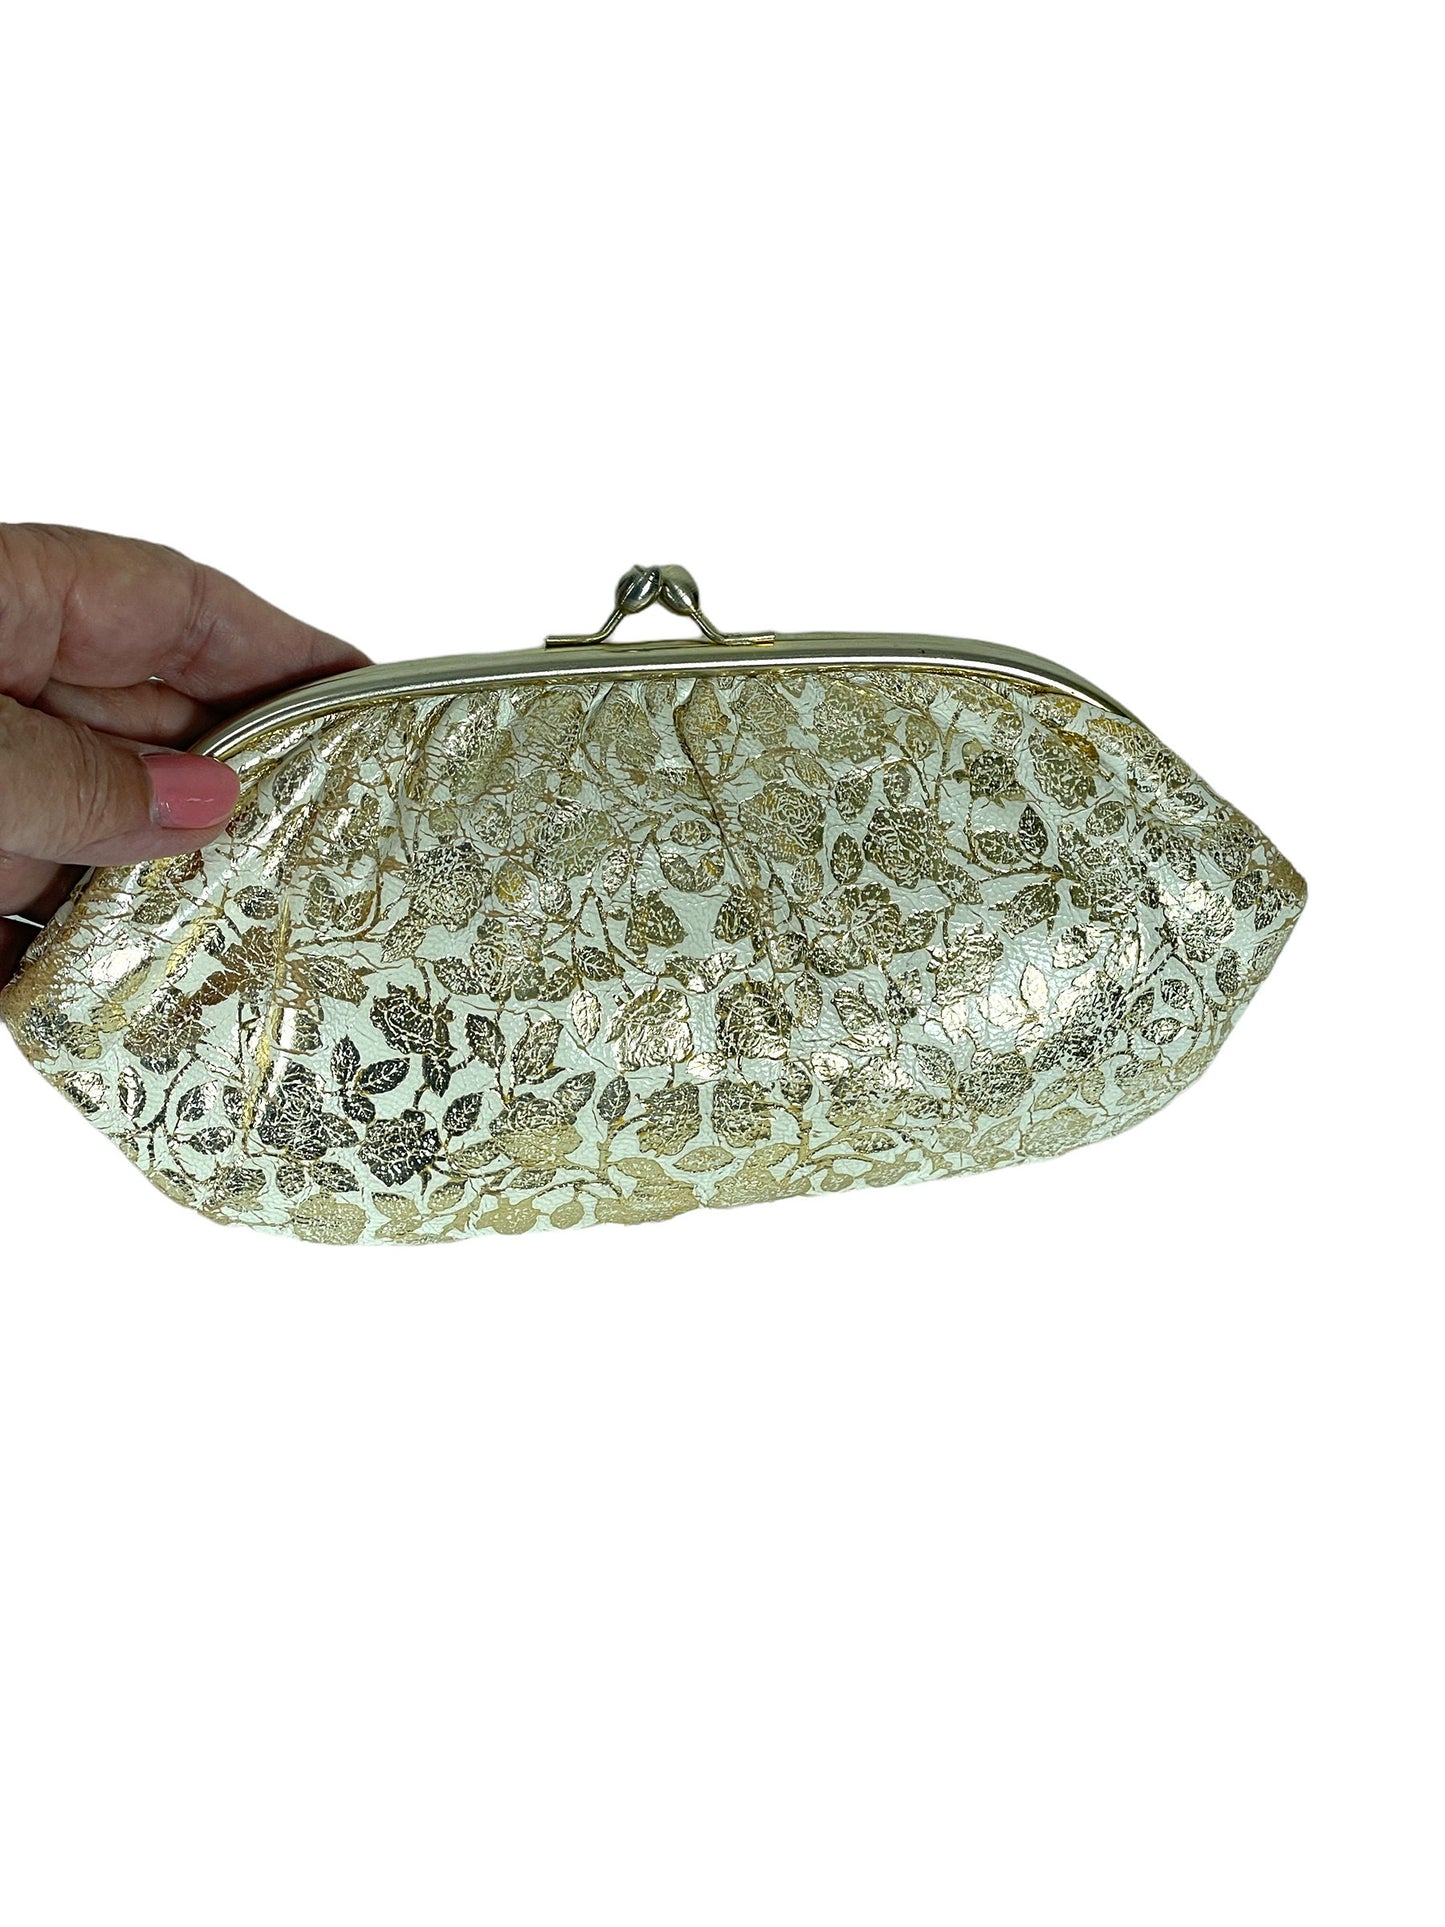 1950s/60s leather clutch with gold roses on white by Delill Made in Italy